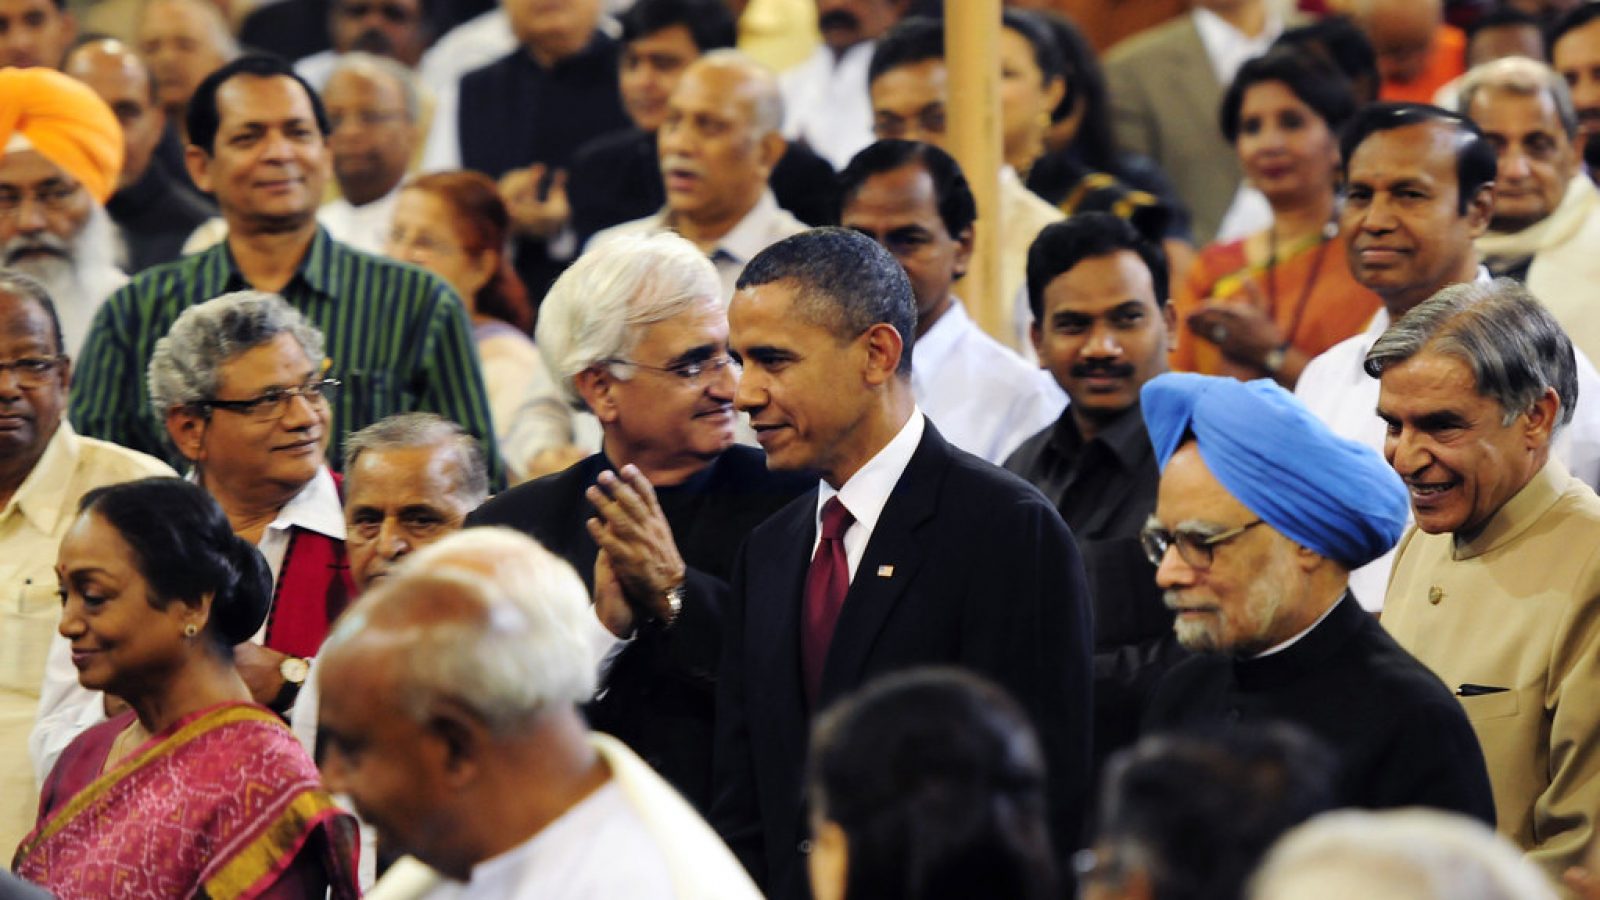 President Obama visits the Indian Parliament